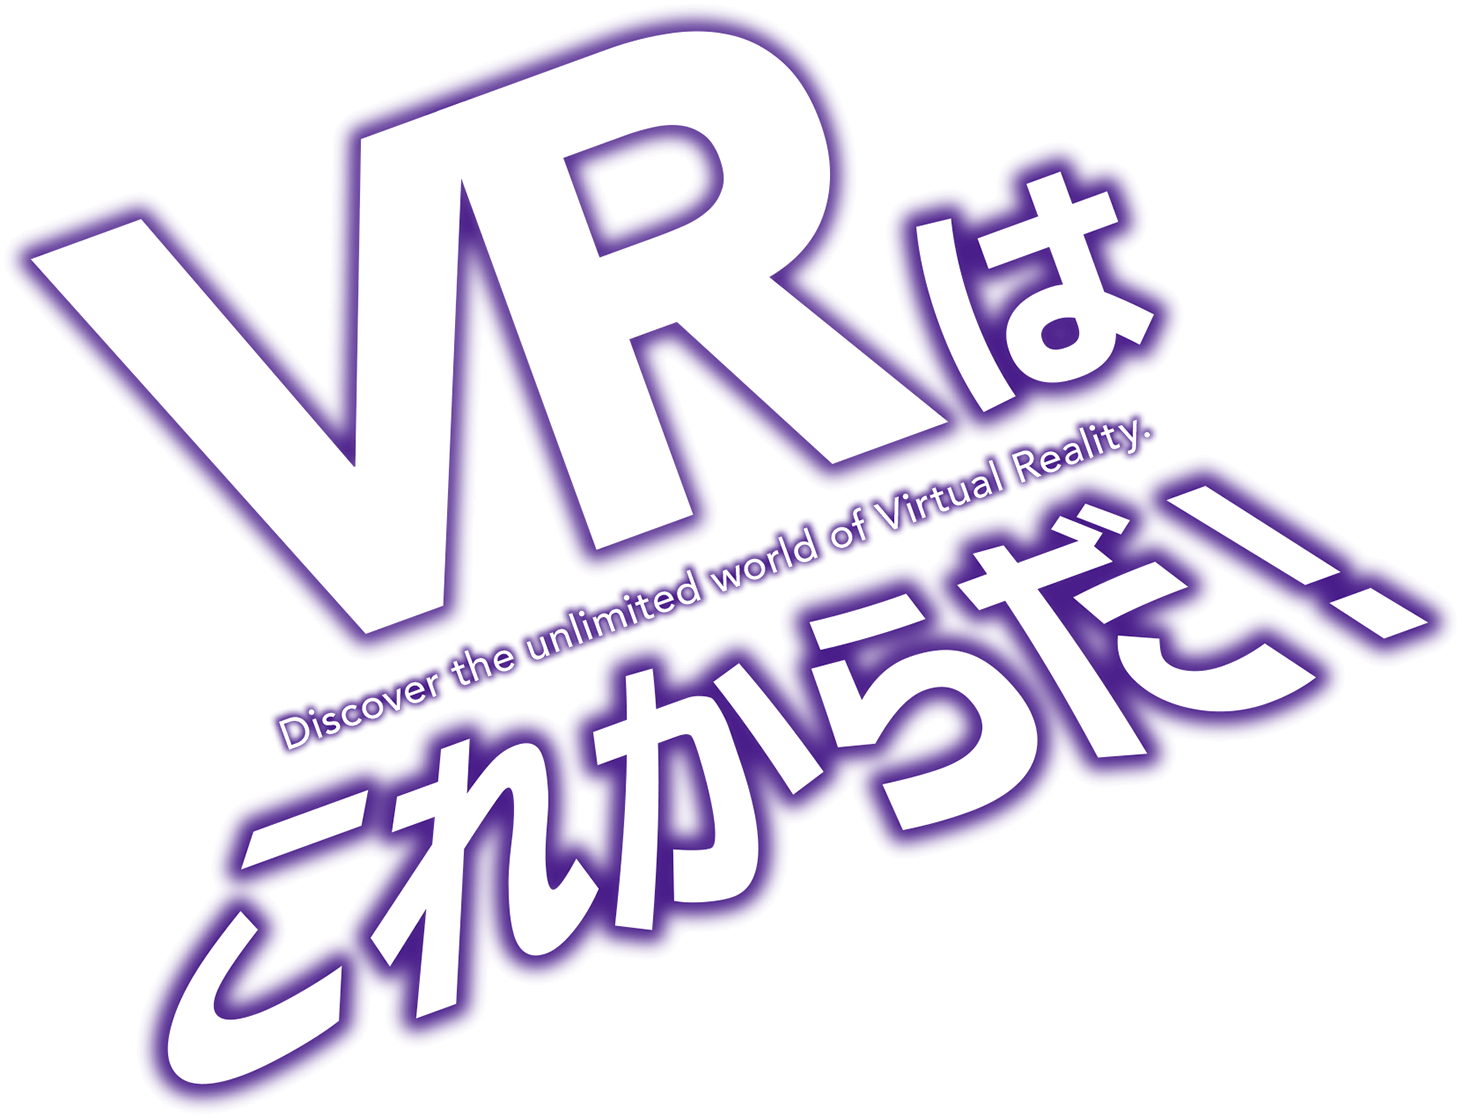 VRはこれからだ! Discover the unlimited world of Virtual Reality